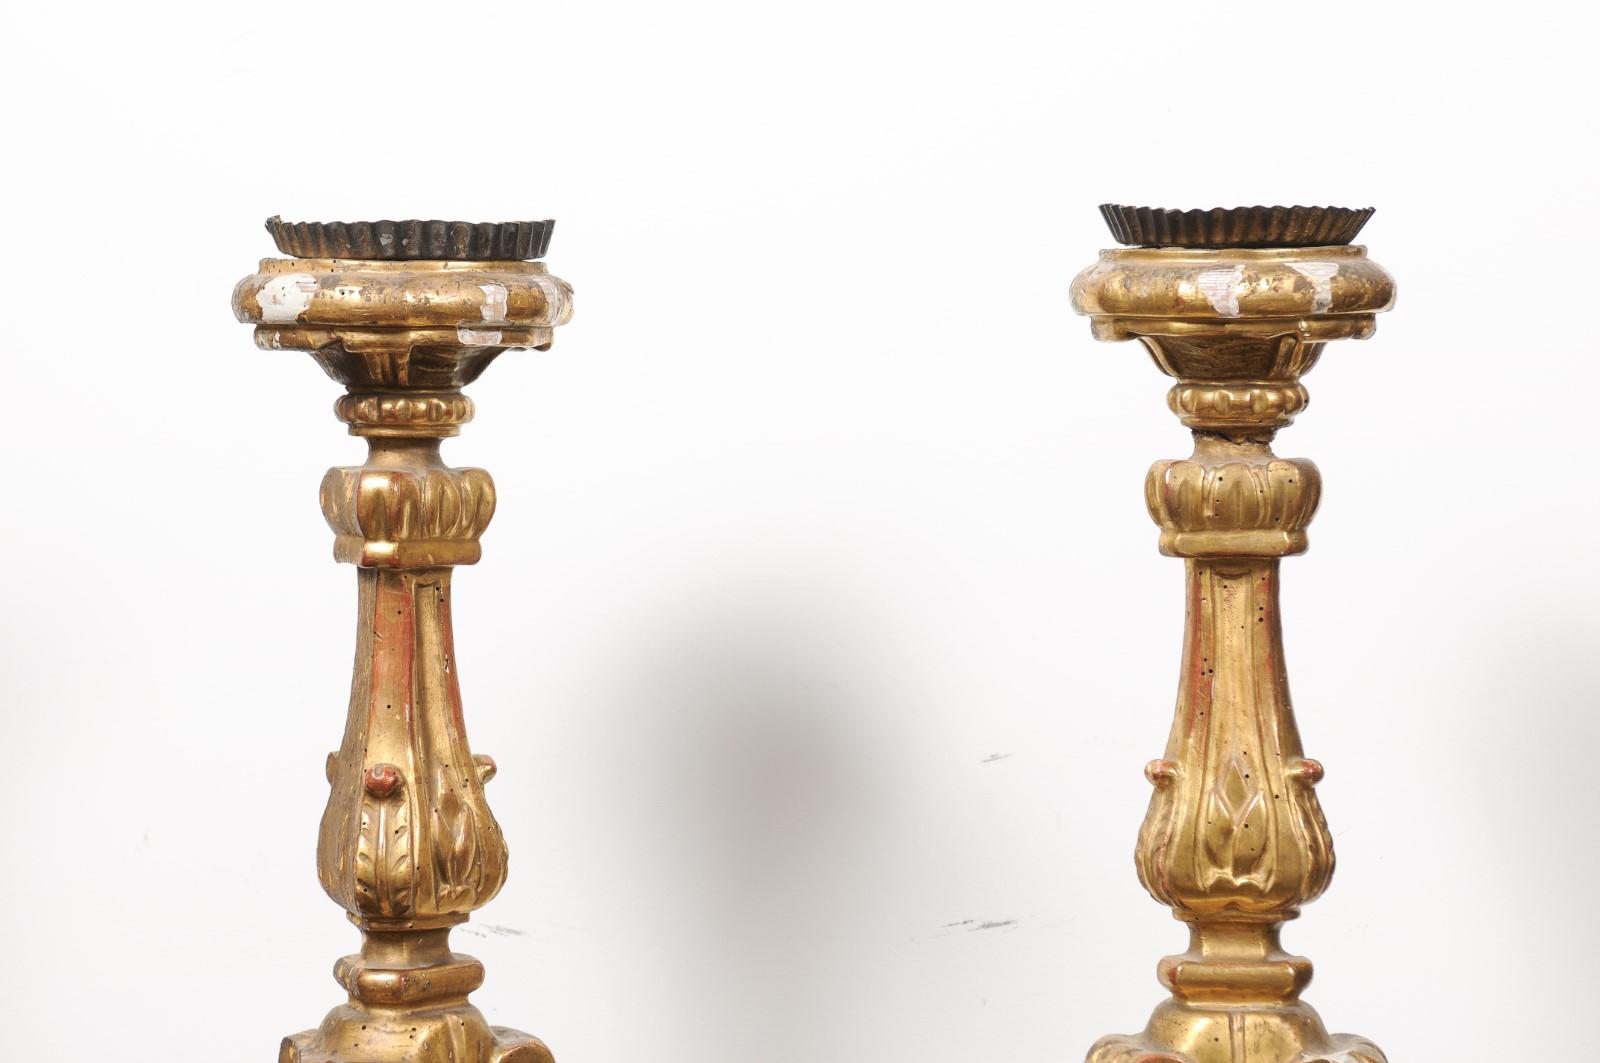 Pair of French 19th Century Gilt Candlesticks with Carved Foliage and Volutes In Good Condition For Sale In Atlanta, GA